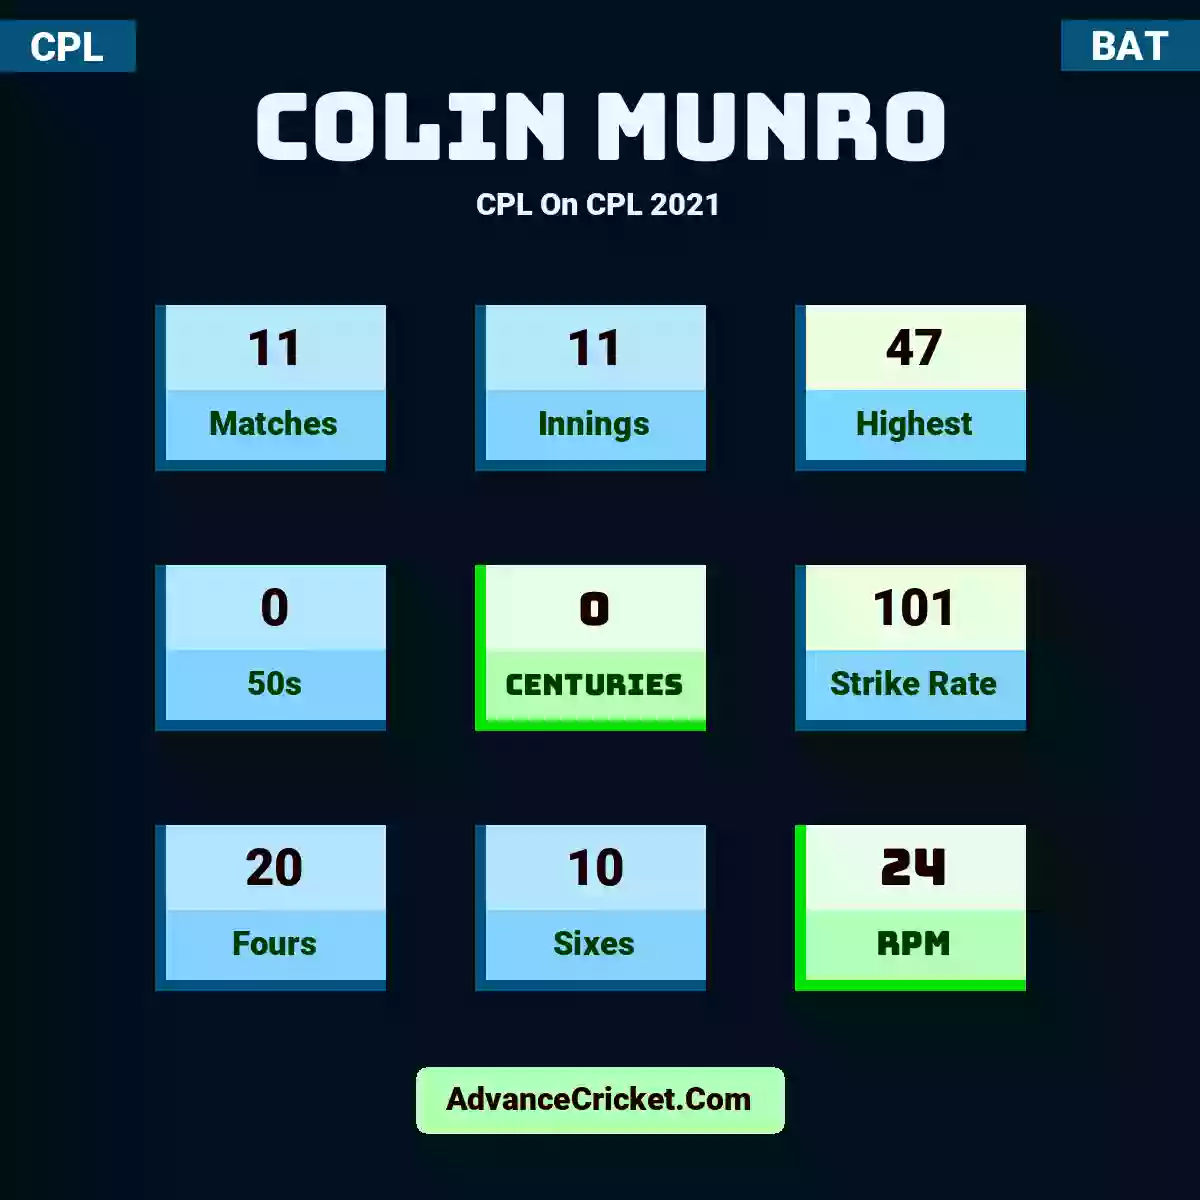 Colin Munro CPL  On CPL 2021, Colin Munro played 11 matches, scored 47 runs as highest, 0 half-centuries, and 0 centuries, with a strike rate of 101. C.Munro hit 20 fours and 10 sixes, with an RPM of 24.